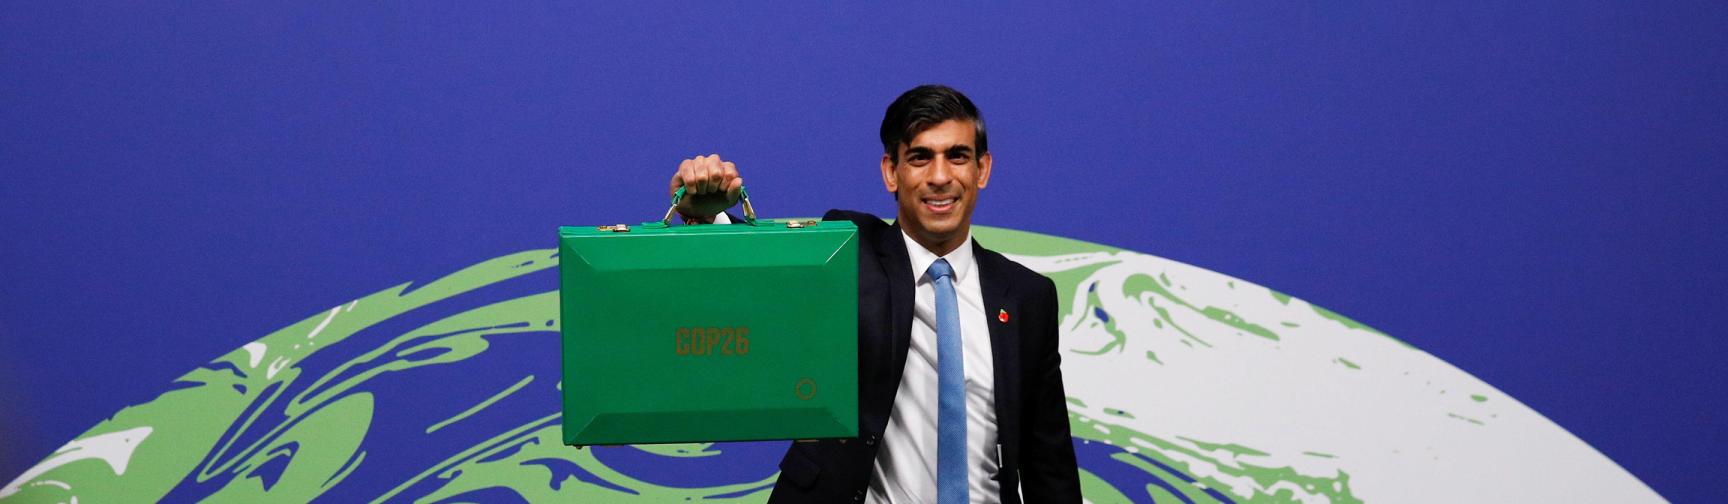 Rishi Sunak at the COP26 conference in Glasgow in 2021. He is holding a green budget briefcase in his hand.